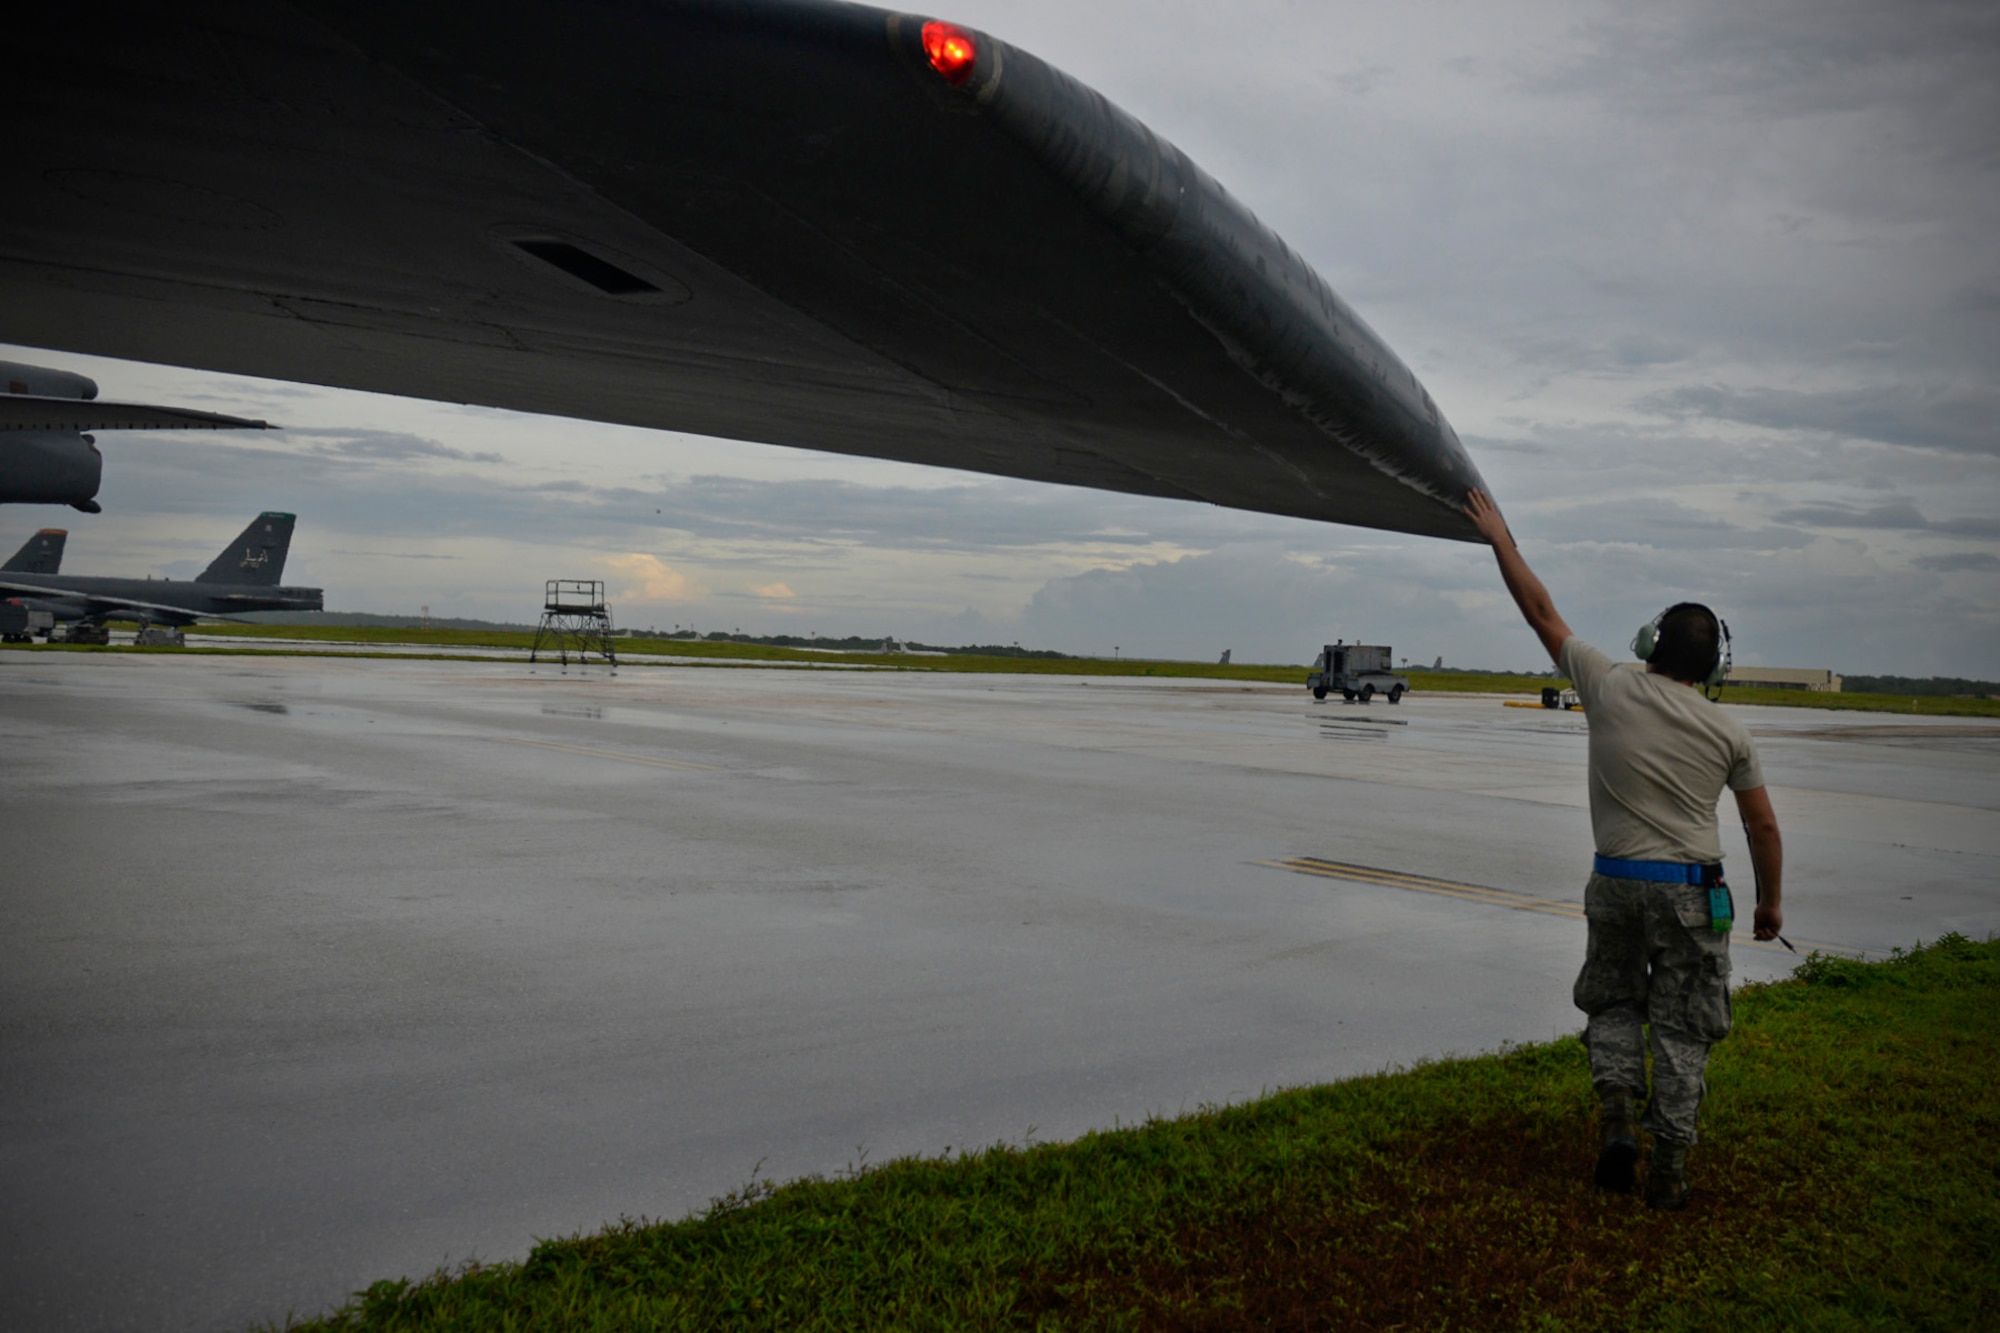 Staff Sgt. Stephen Cole, B-52 Stratofortress crew chief assigned to the 20th Expeditionary Aircraft Maintenance Squadron, gives his aircraft a final good-luck touch before takeoff Aug. 22, 2015, at Andersen Air Force Base, Guam. Bomber crews with the 20th Expeditionary Bomb Squadron are part of U.S. Pacific Command’s continuous bomber presence and support ongoing operations in the Indo-Asia-Pacific region. (U.S. Air Force photo by Staff Sgt. Alexander W. Riedel/Released)